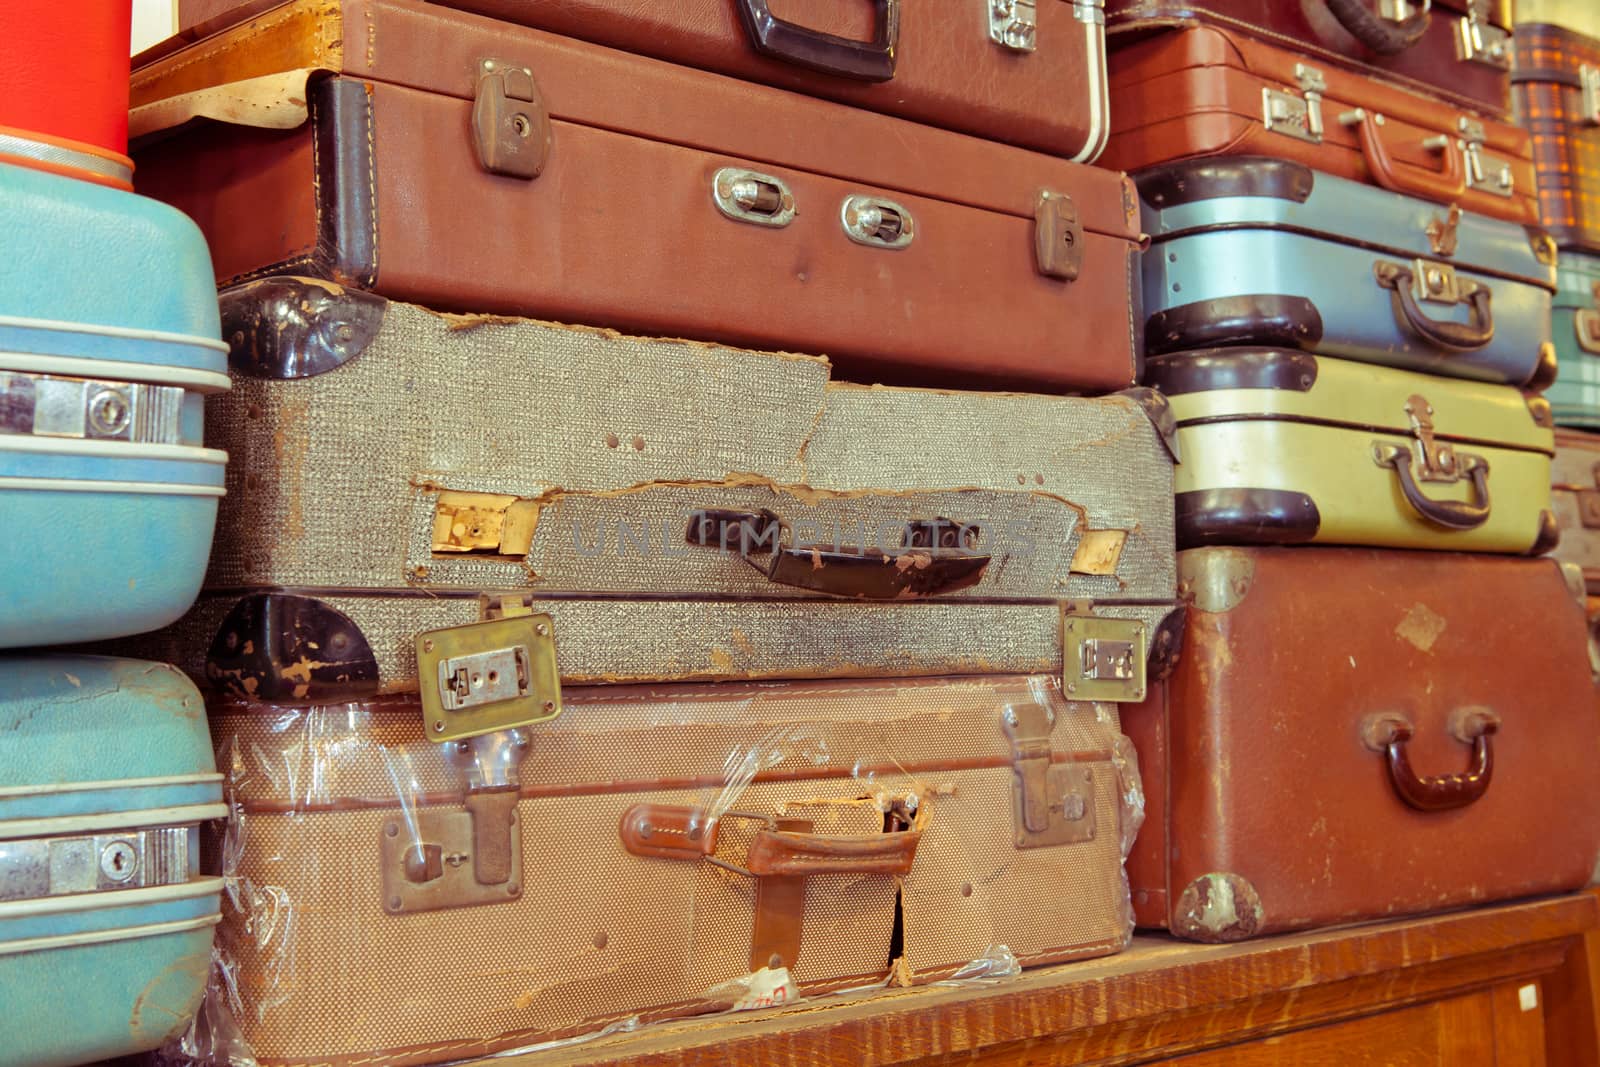 Vintage old battered leather suitcases stacked